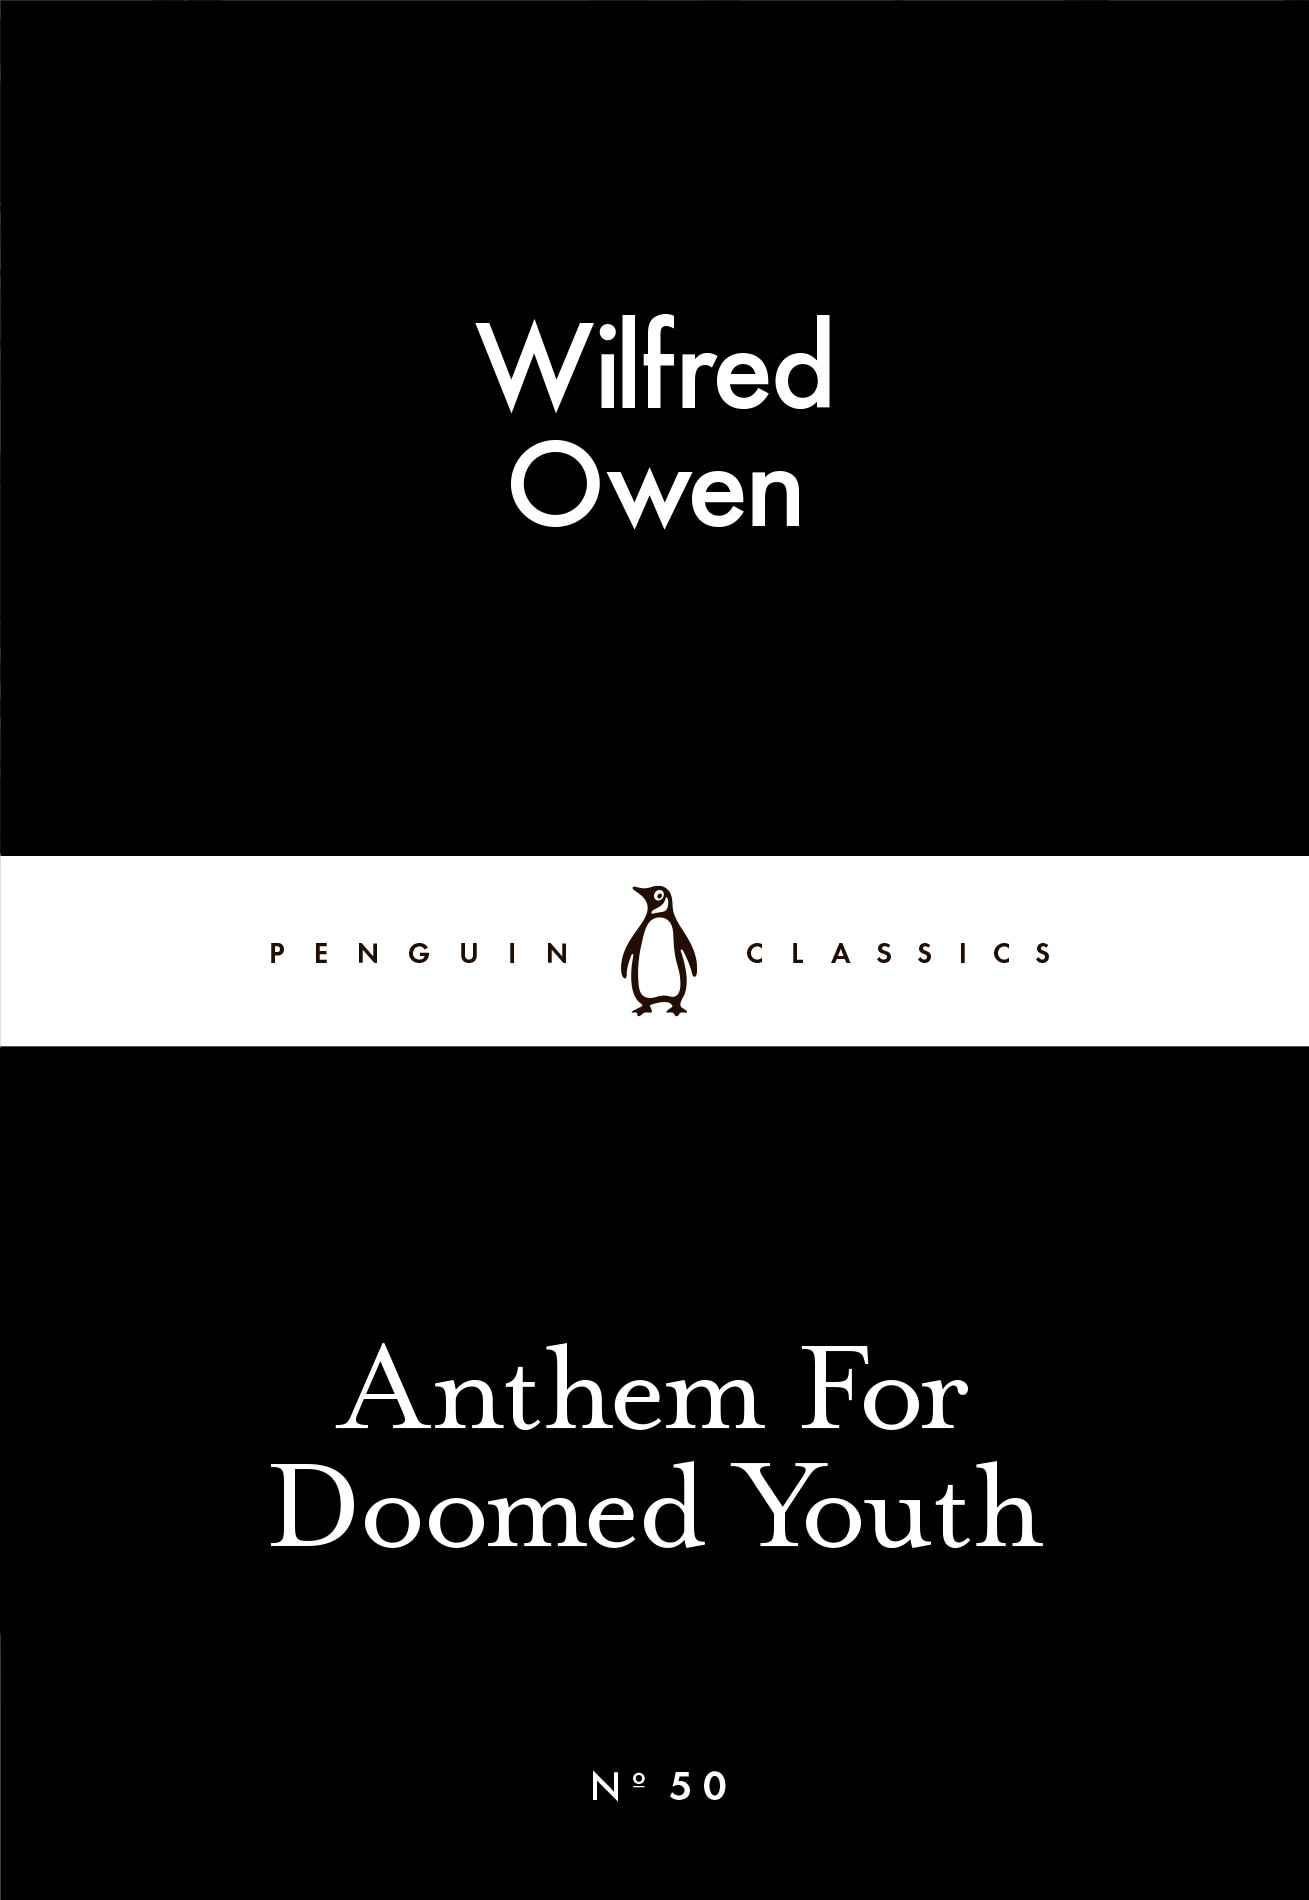 Book “Anthem For Doomed Youth” by Wilfred Owen — February 26, 2015